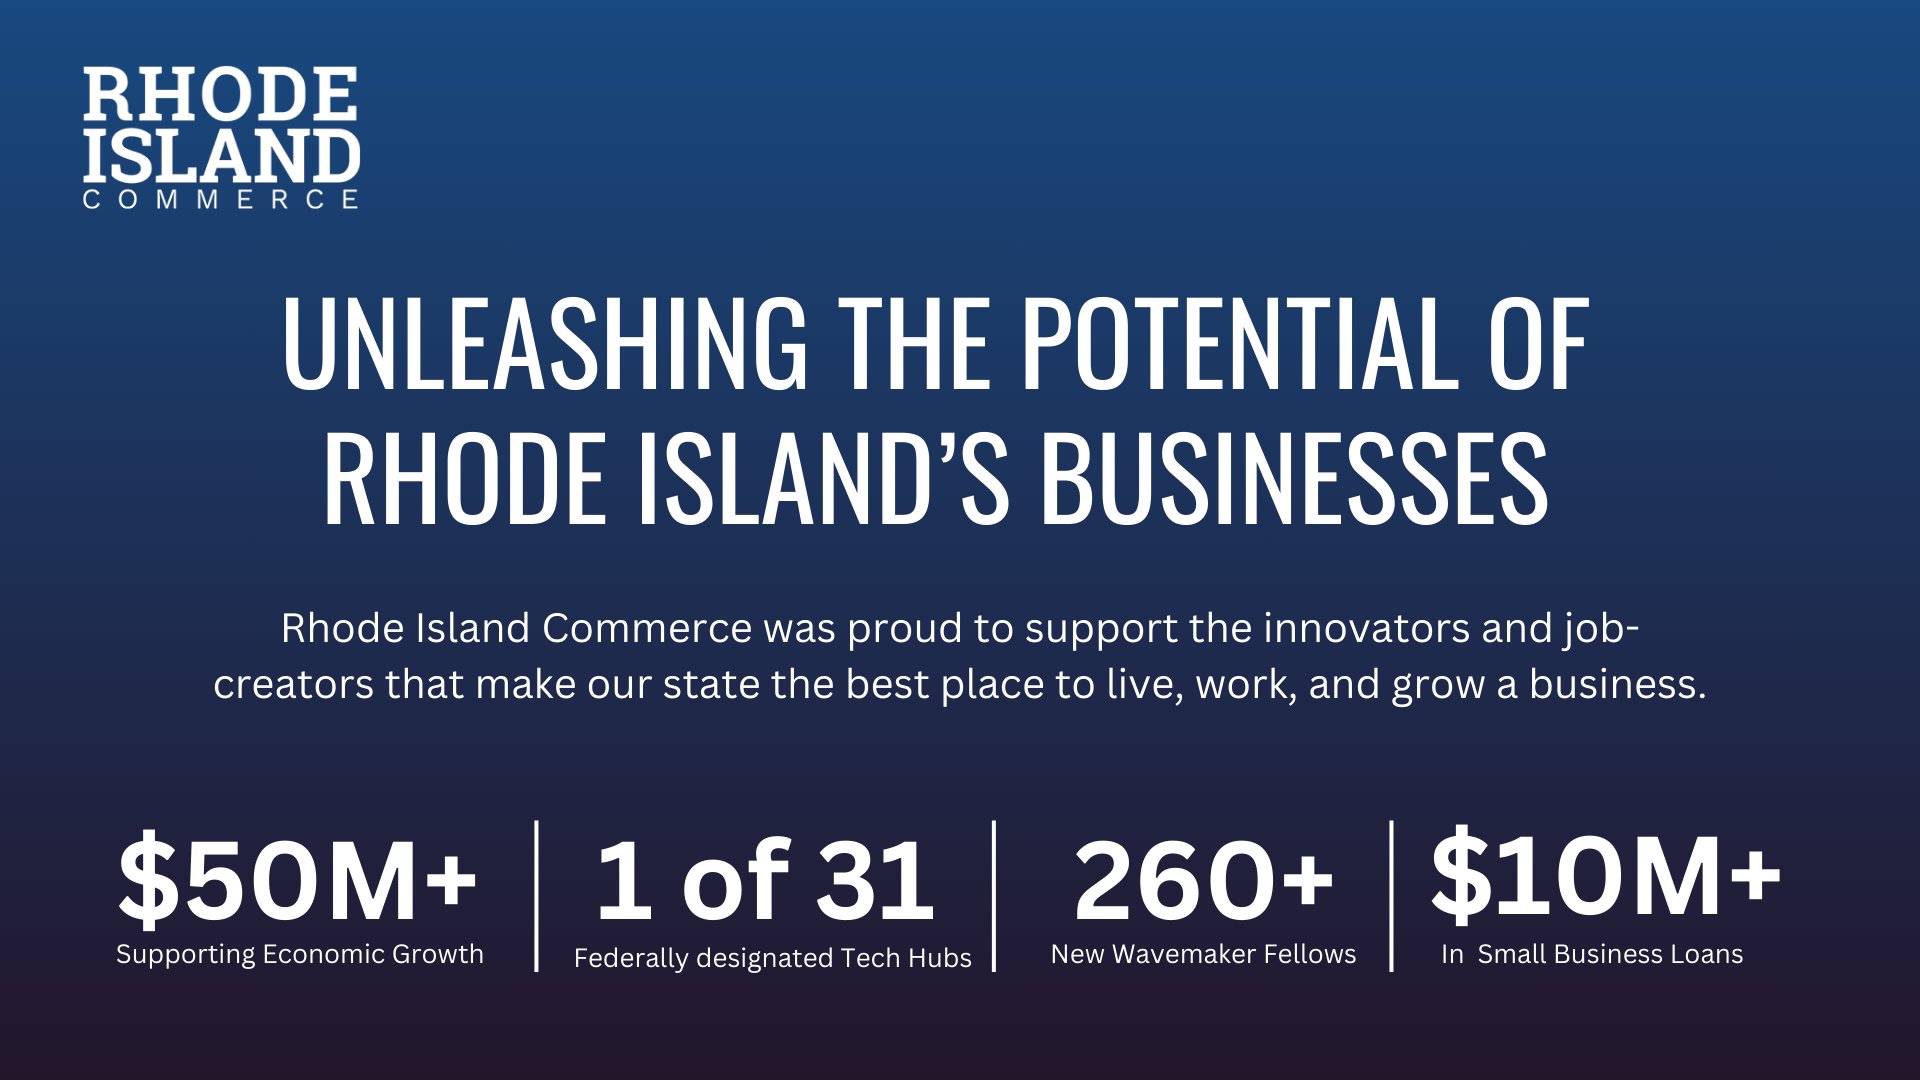 Rhode Island Commerce on X: From investing more than $50 million